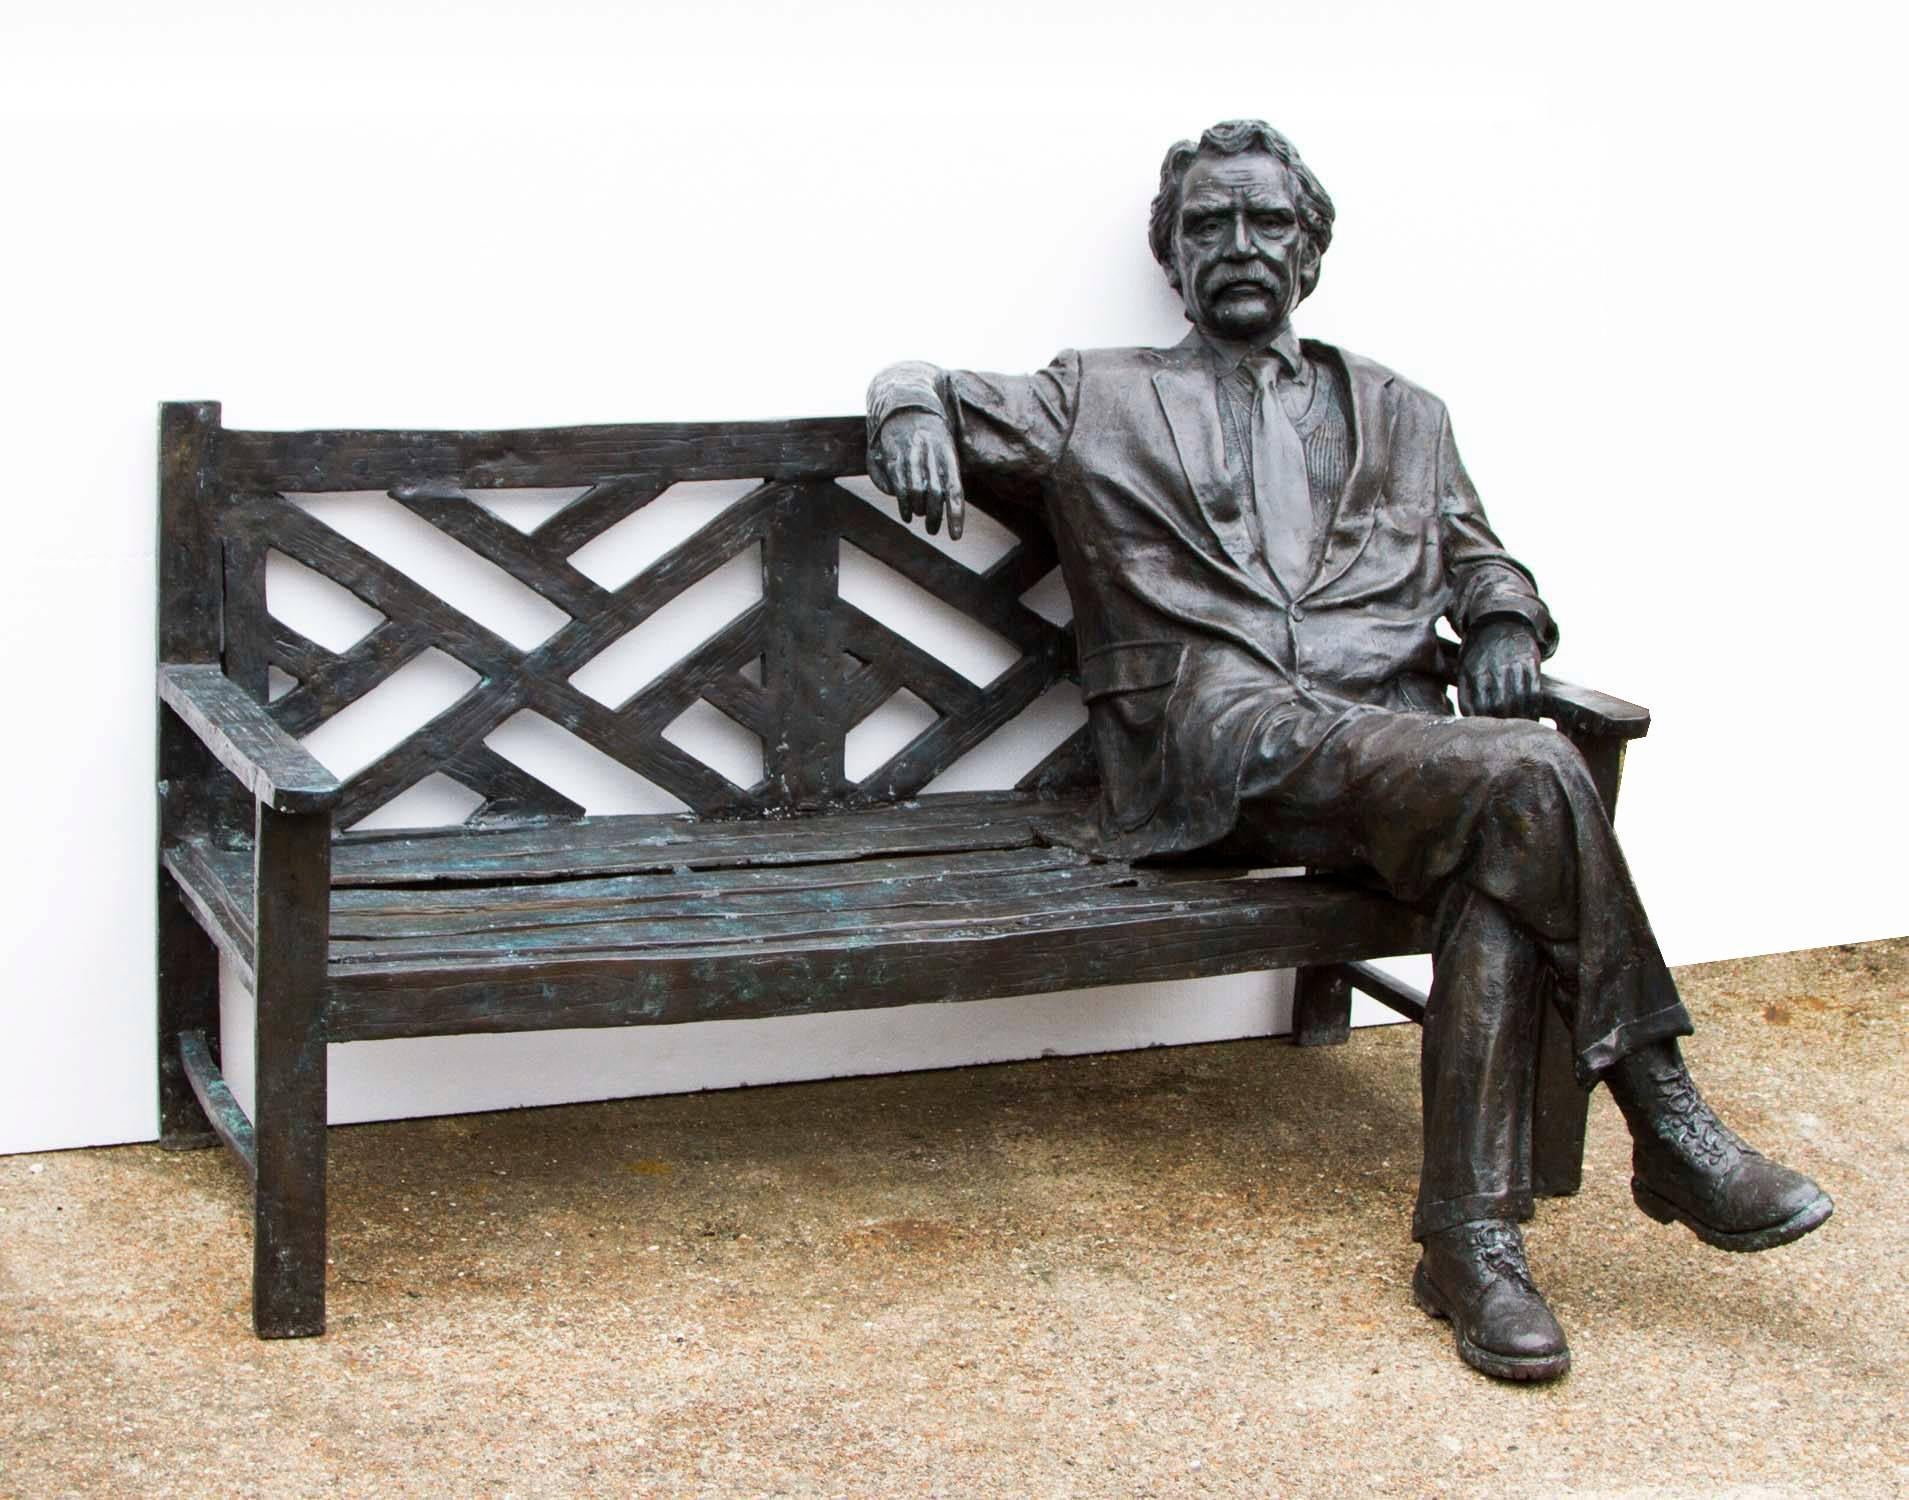 There is no mistaking the unique quality and style of this exquisite lifesize statue of Albert Einstein sitting casually on a outdoor bench enjoying the view, from the last quarter of the 20th century.

It will soon become the focal point of your